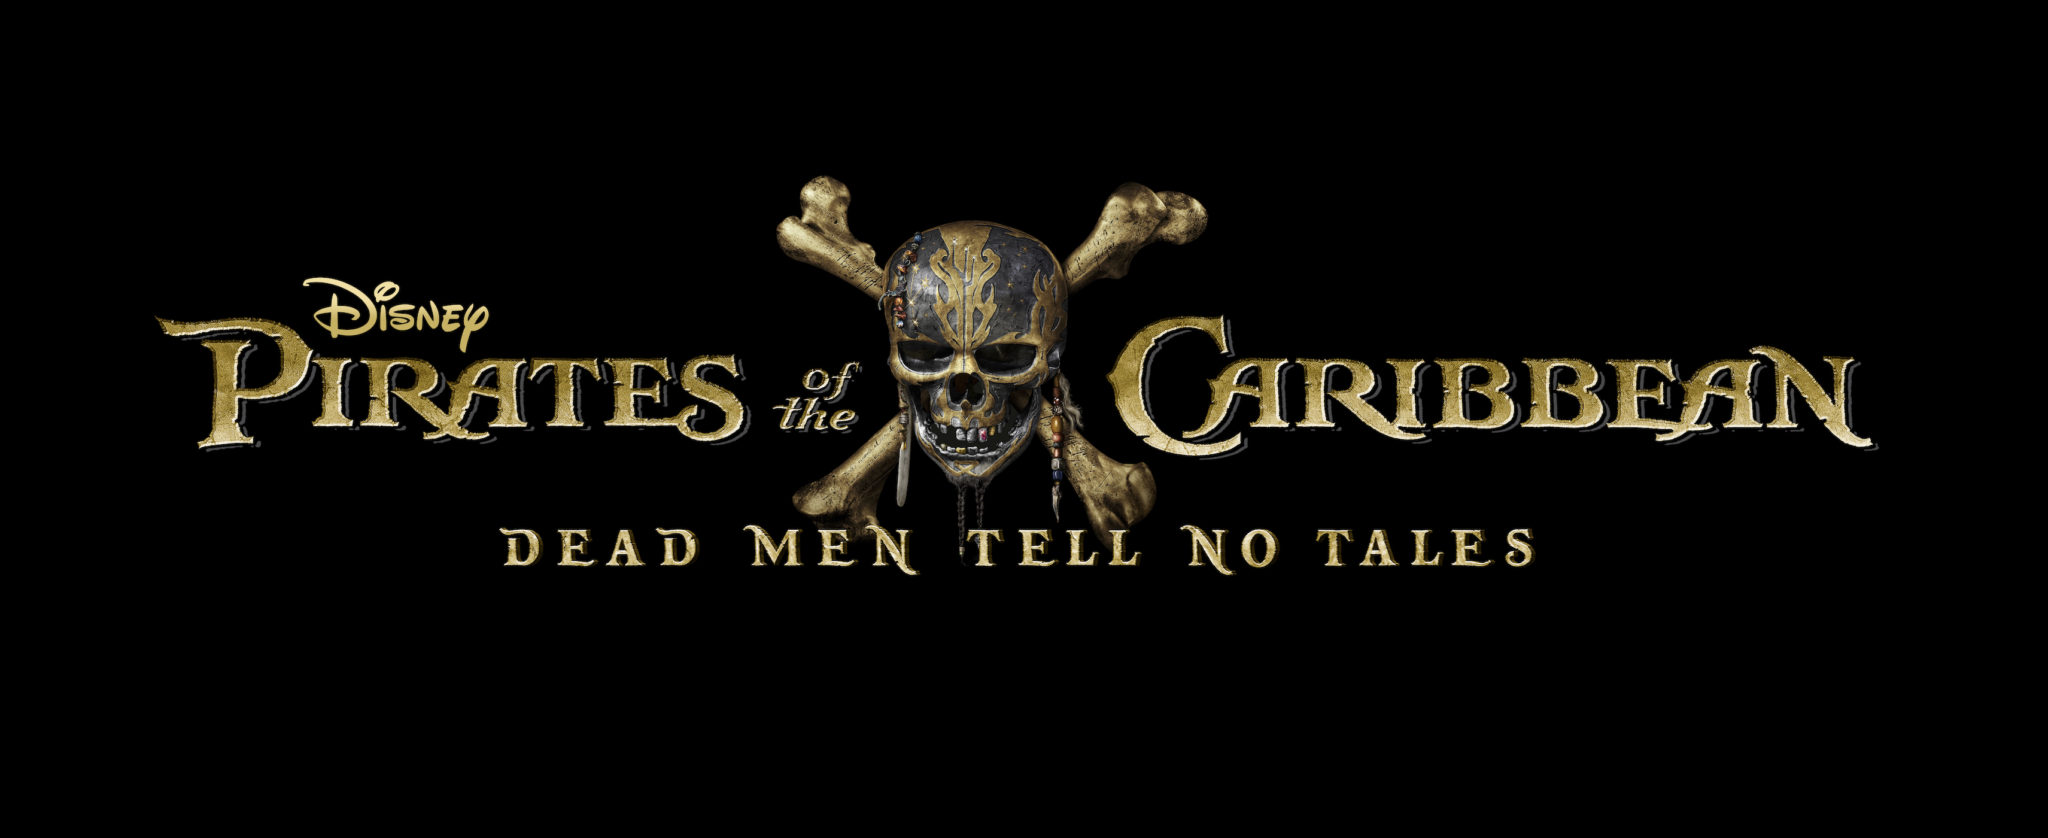 Newest Pirates of the Caribbean – Dead Men Tell No Tales Trailer with Orlando Bloom!